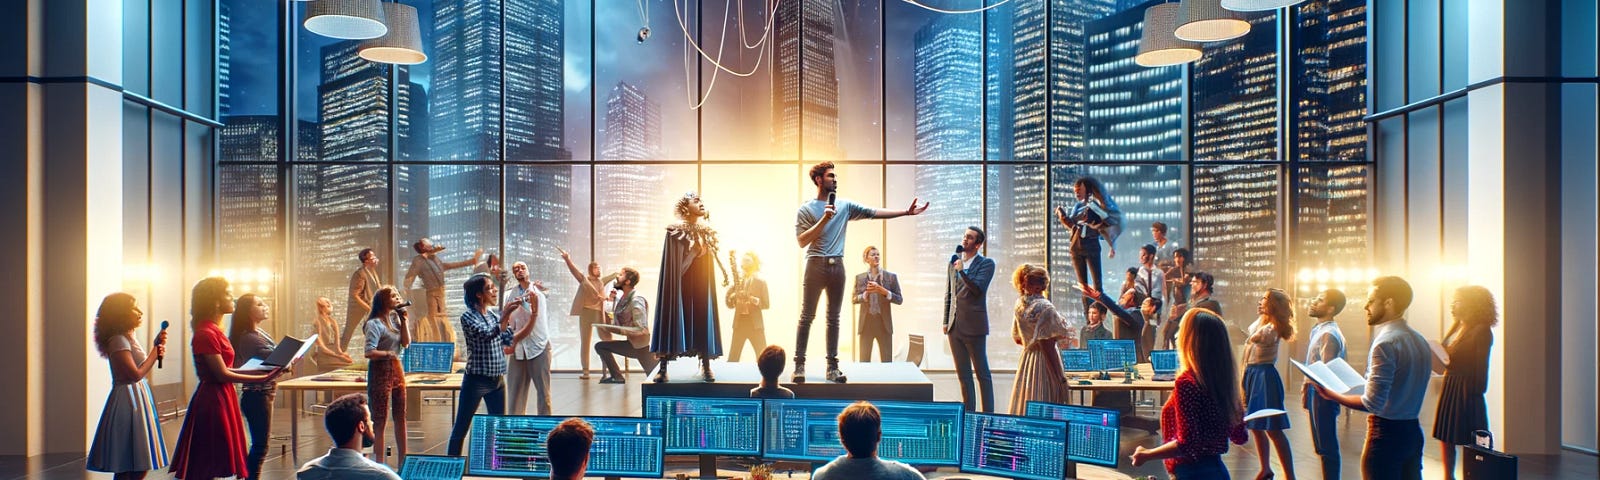 An image of a software change advisory board performing a dramatic play in a modern conference room, creatively blending technology and drama.